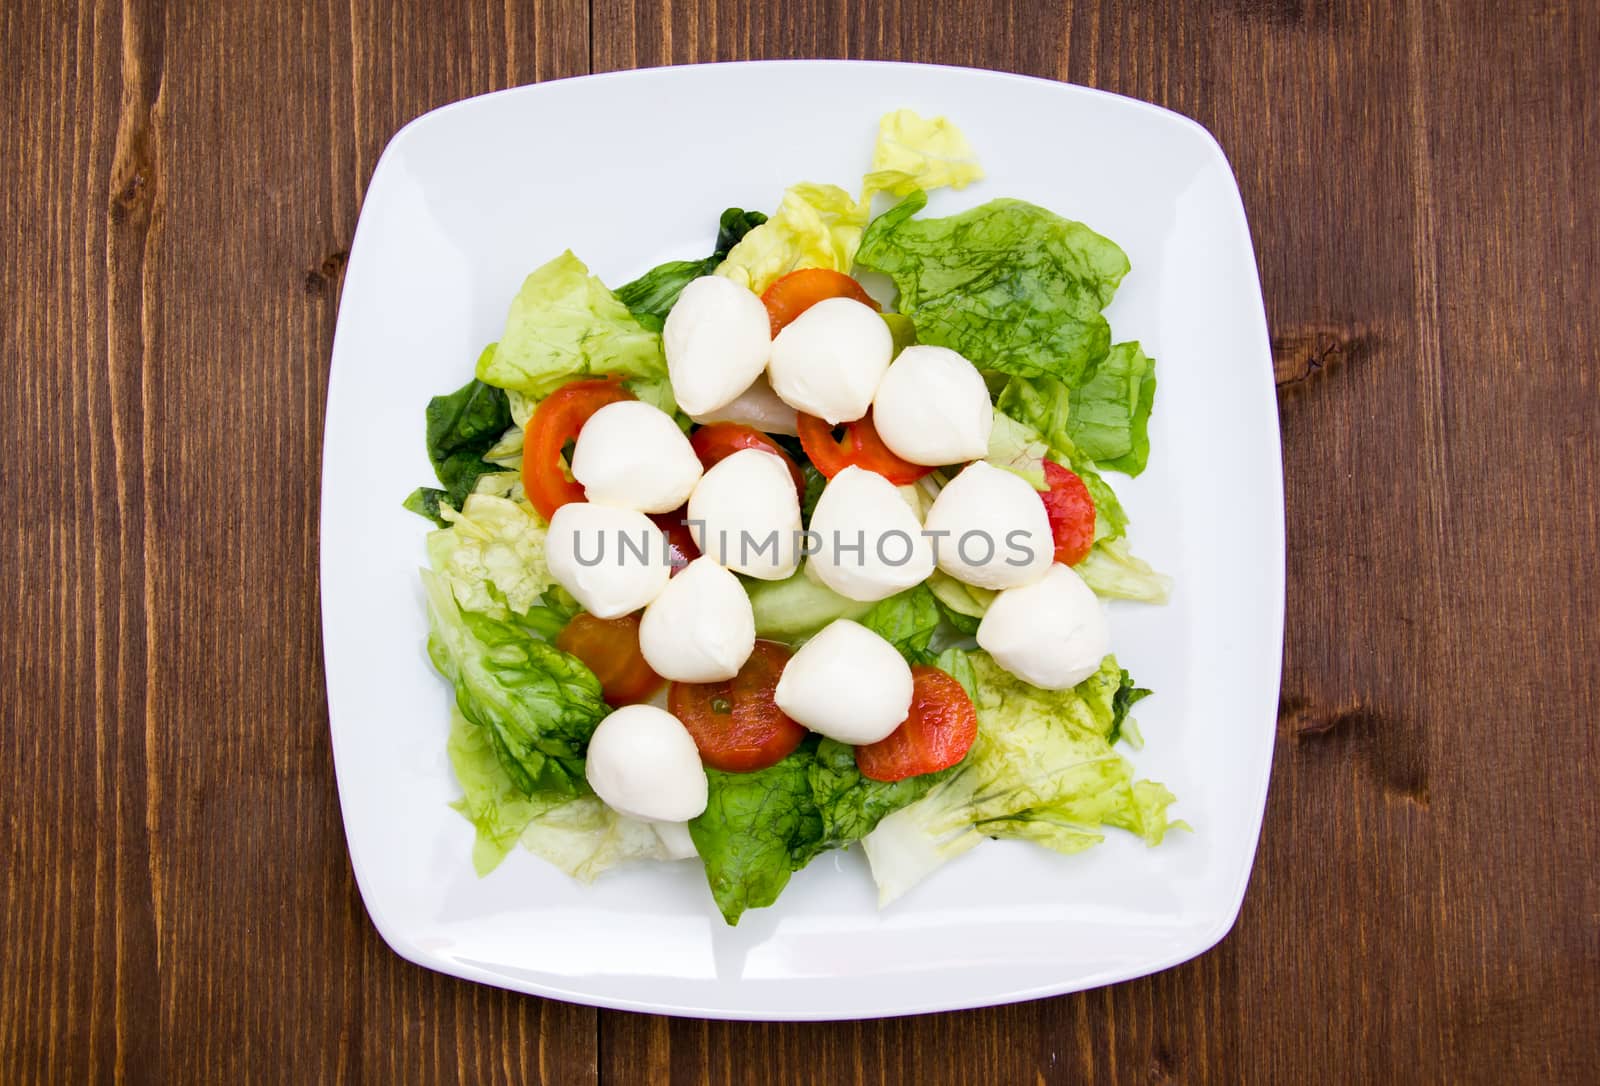 Salad with tomatoes and mozzarella on wood from above by spafra